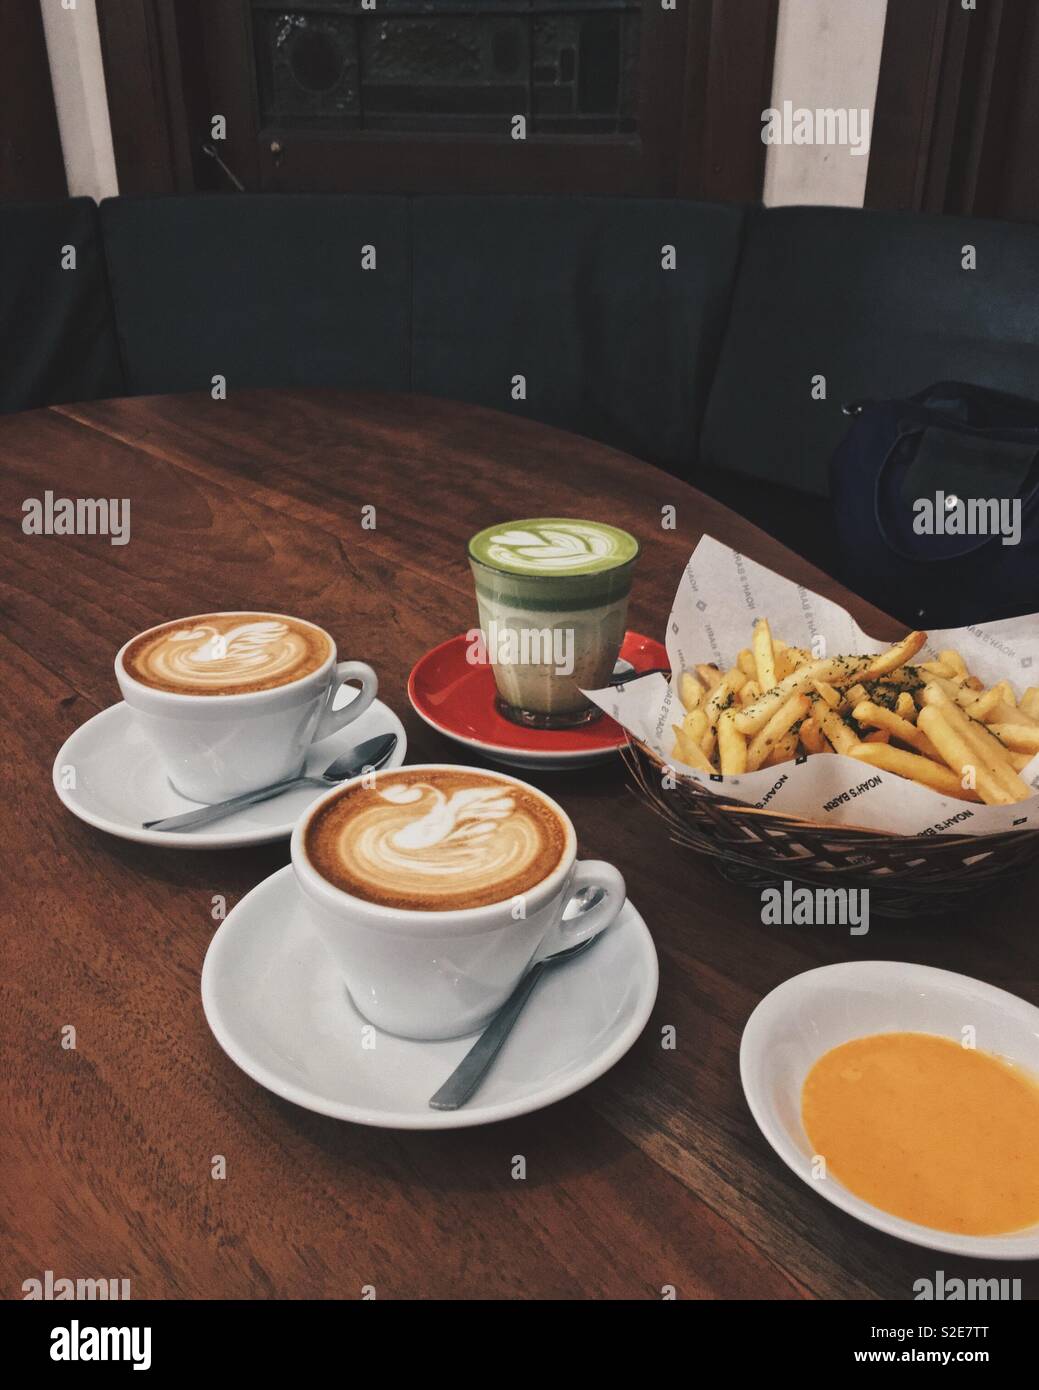 Afternoon coffee and matcha latte with fries Stock Photo